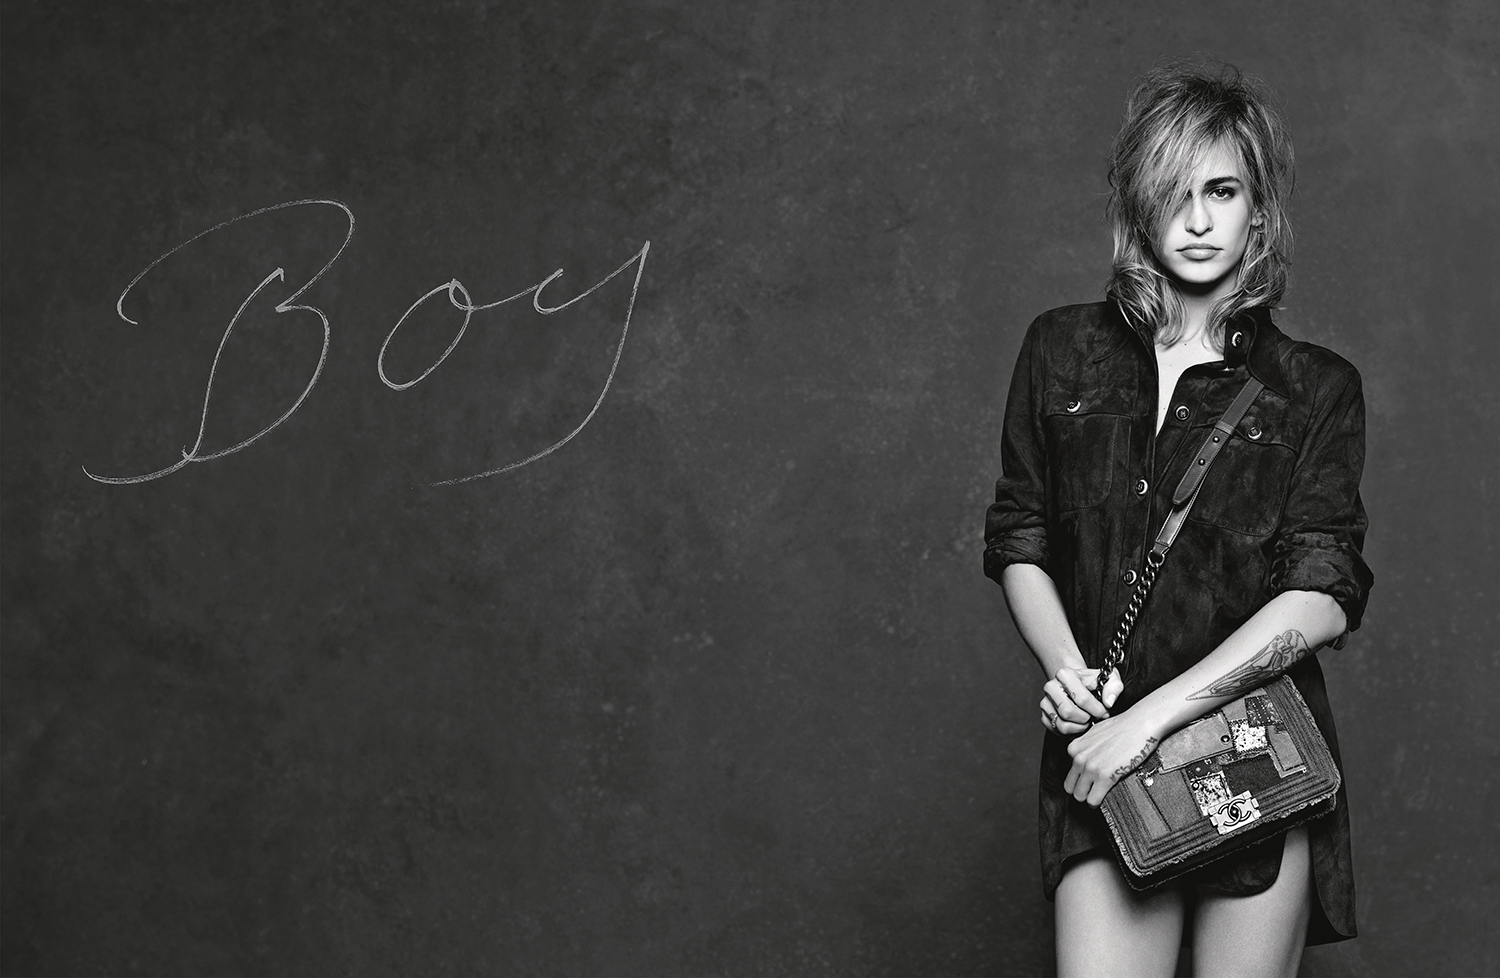 ALICE-DELLAL-BOY-CHANEL-AD-CAMPAIGN-PICTURE-BY-KARL-LAGERFELD_LD